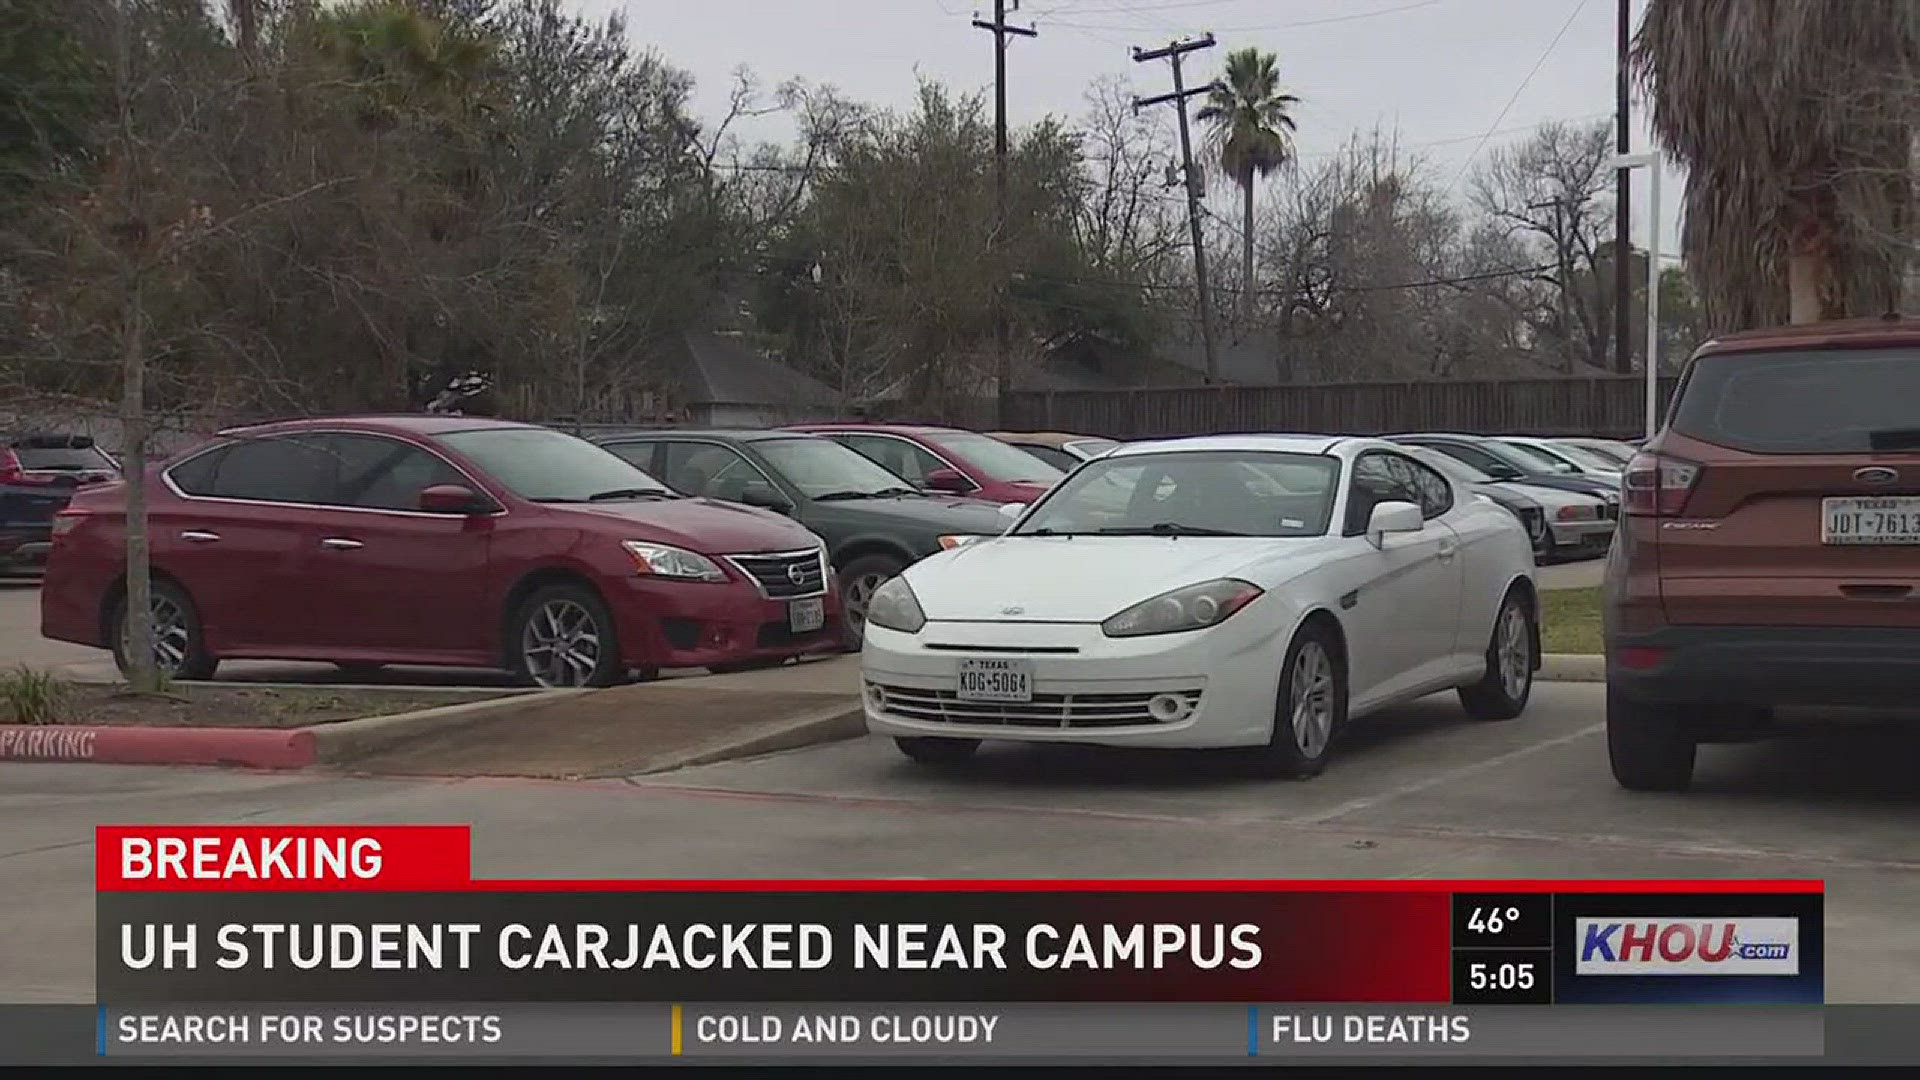 Authorities are looking for the suspects accused of carjacking a University of Houston student on Monday.